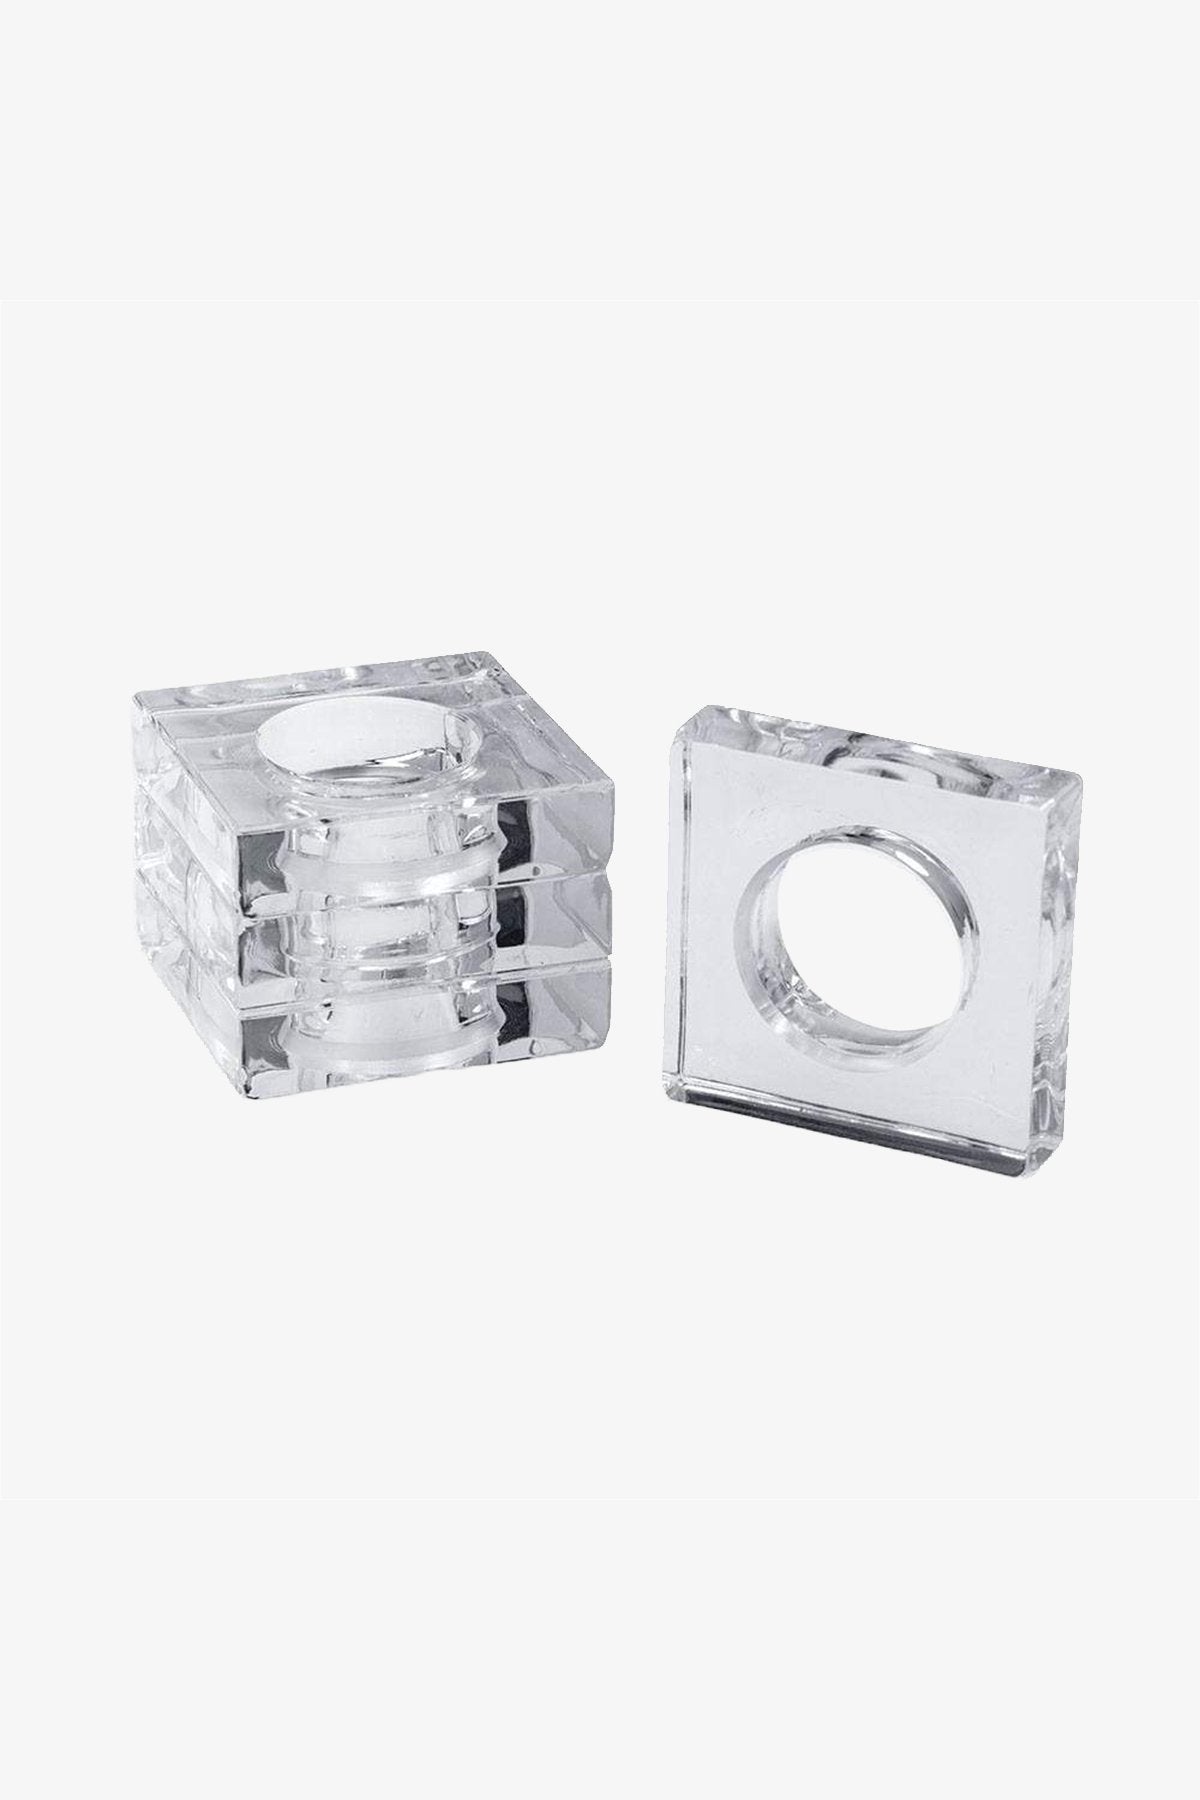 Acrylic Napkin Rings in Clear - Set of 4 - shop-olivia.com